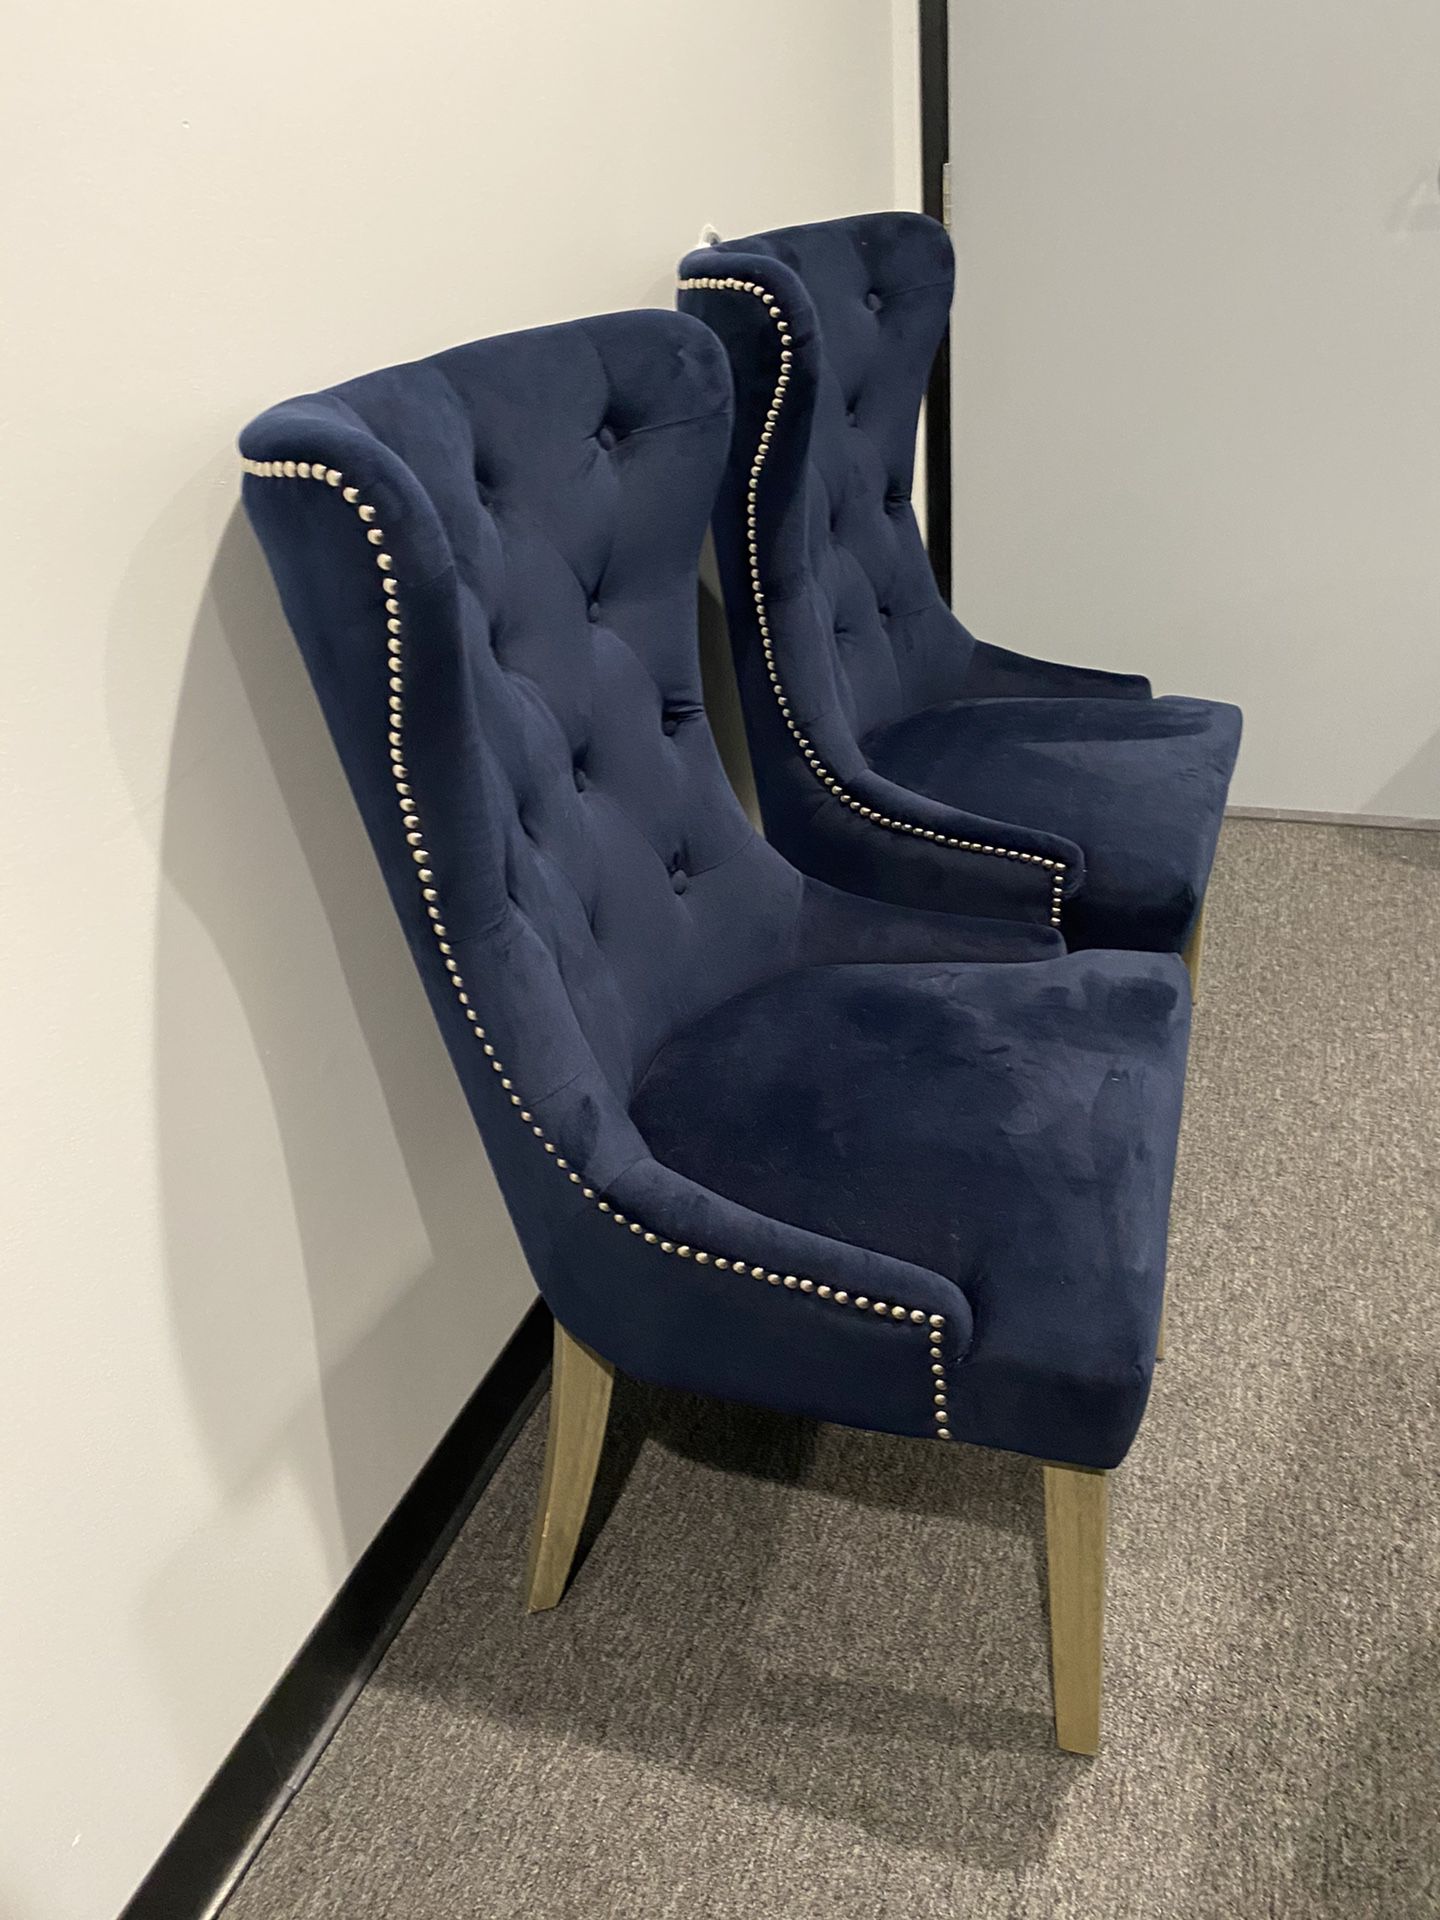 Reduced price - Two Blue Velvet Dining Room Chairs